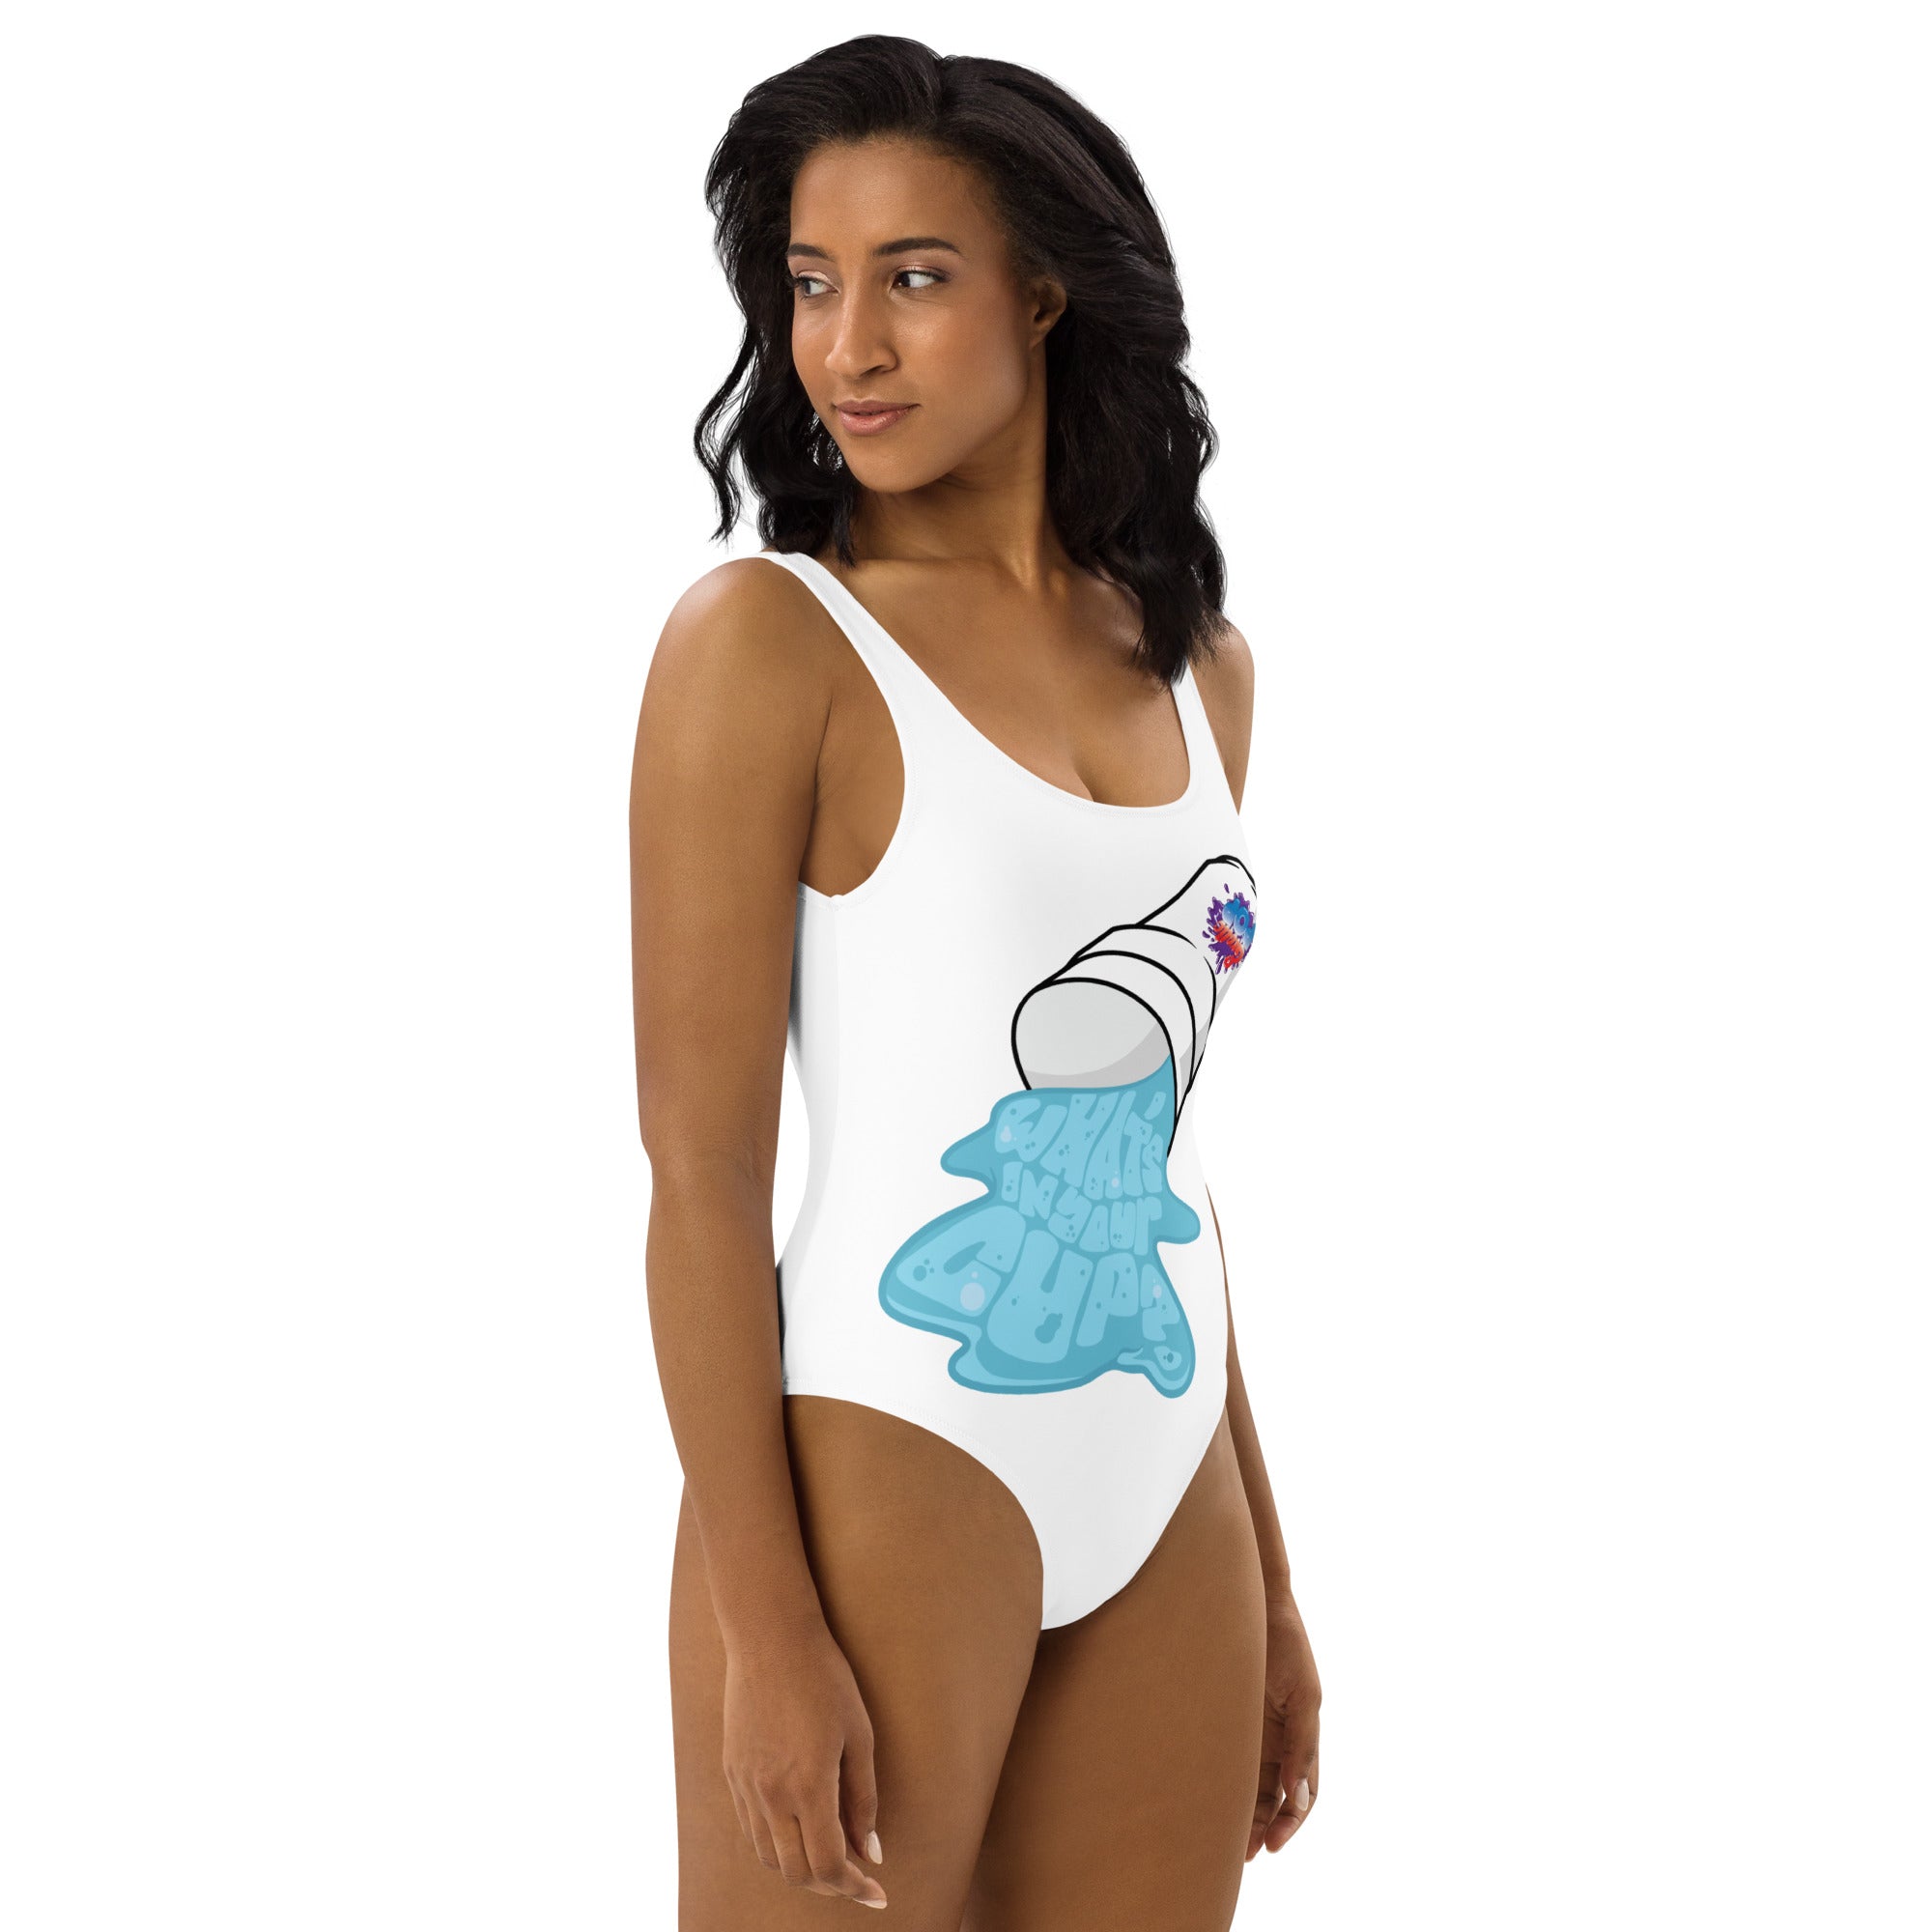 What's In Your Cup? One-Piece Swimsuit